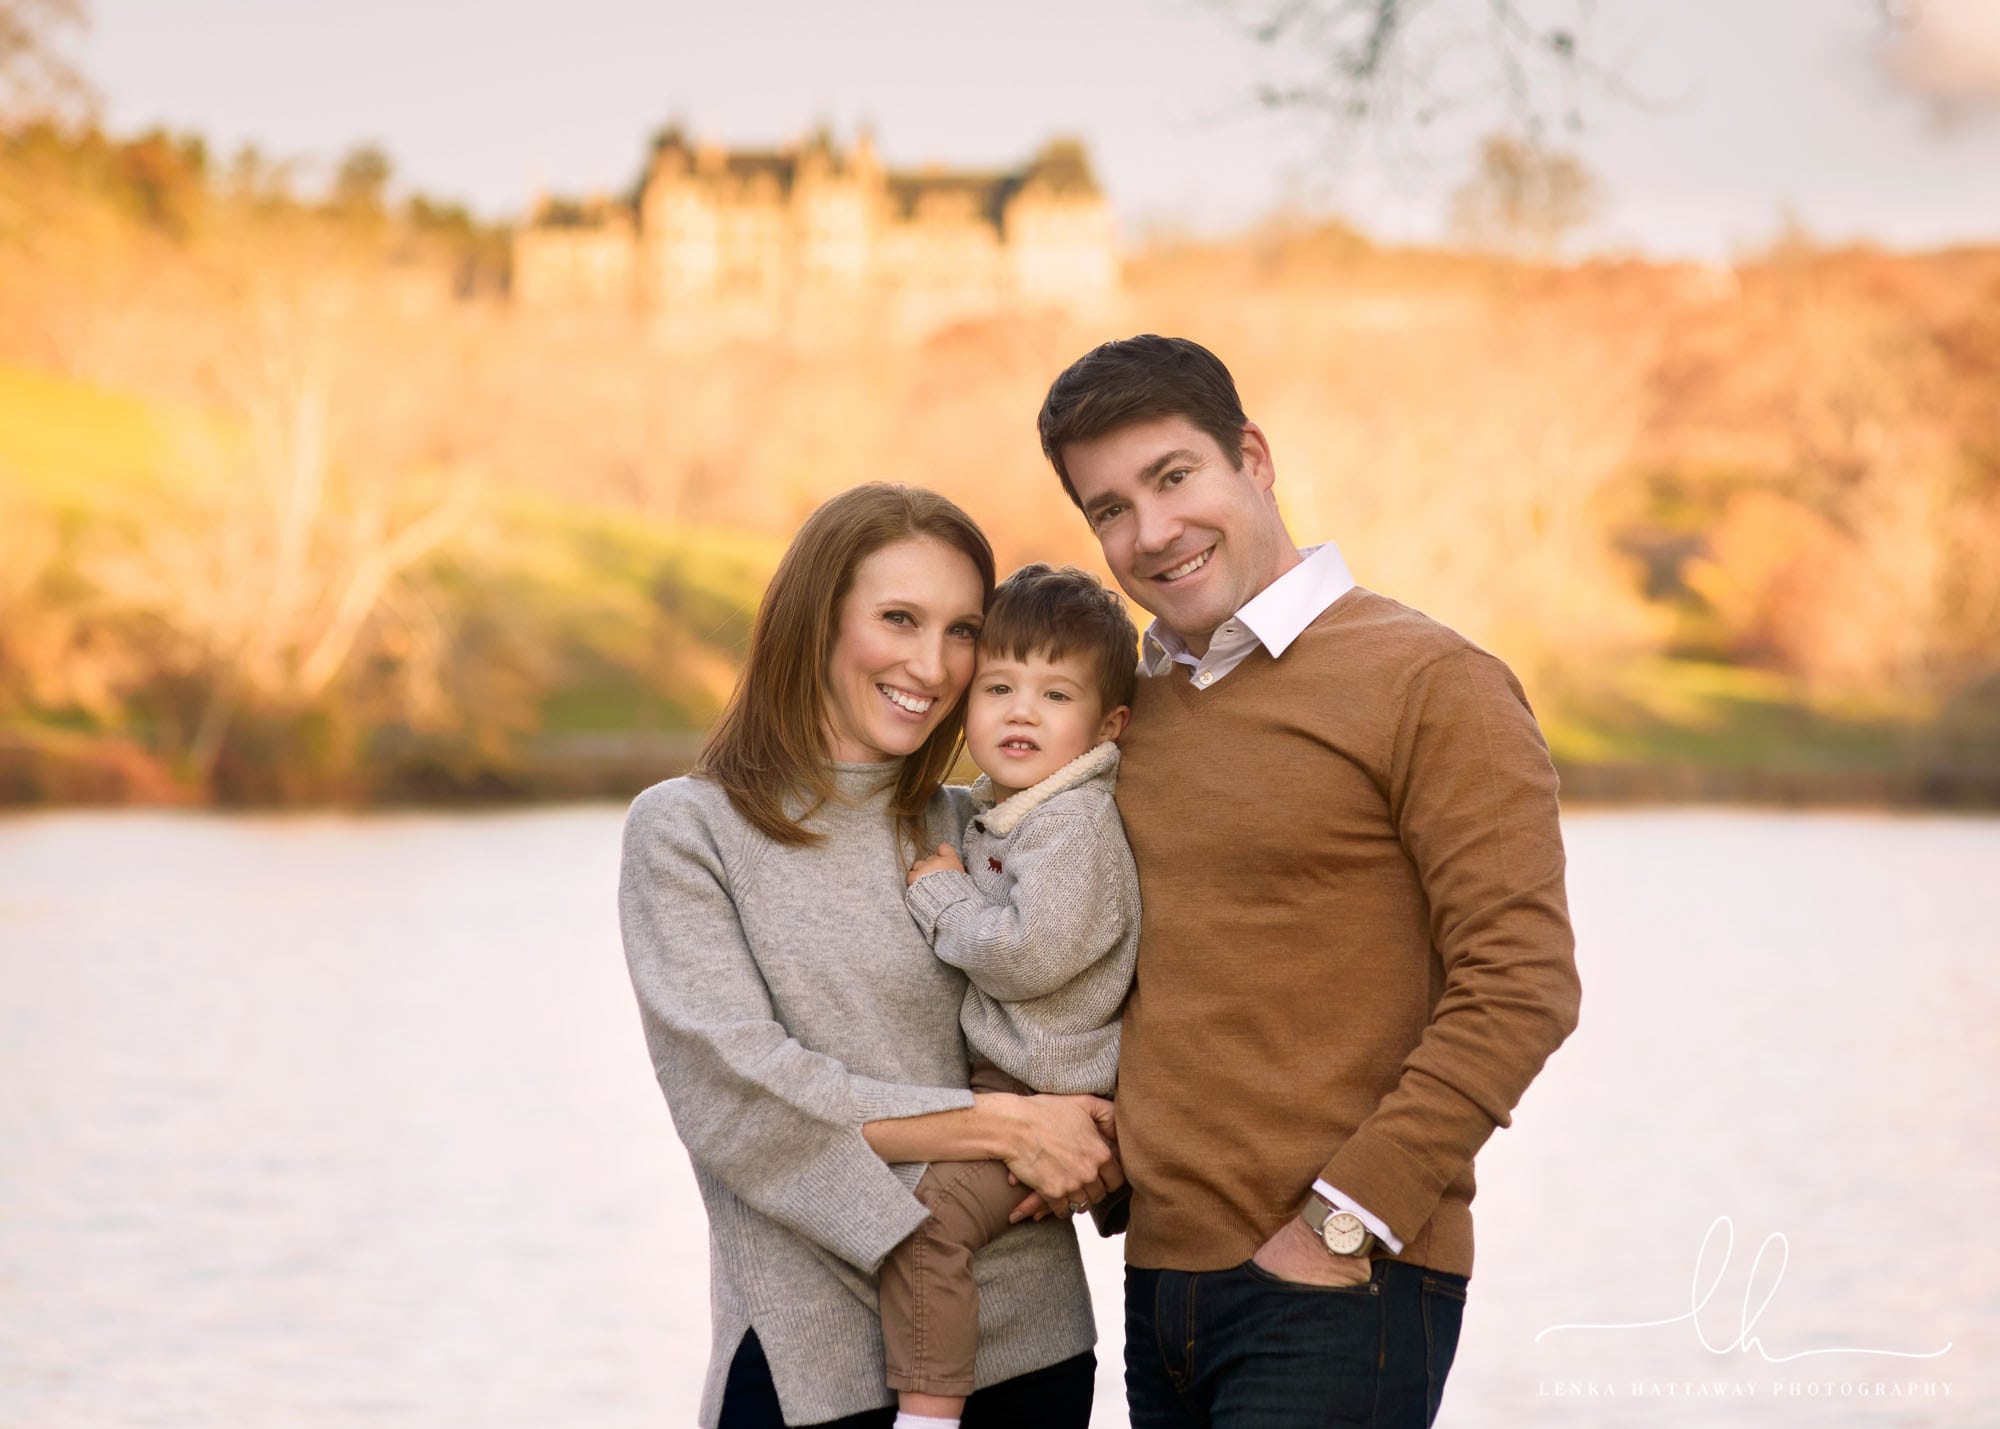 Fall family photography session at the Biltmore Estate with the Biltmore house in the background.